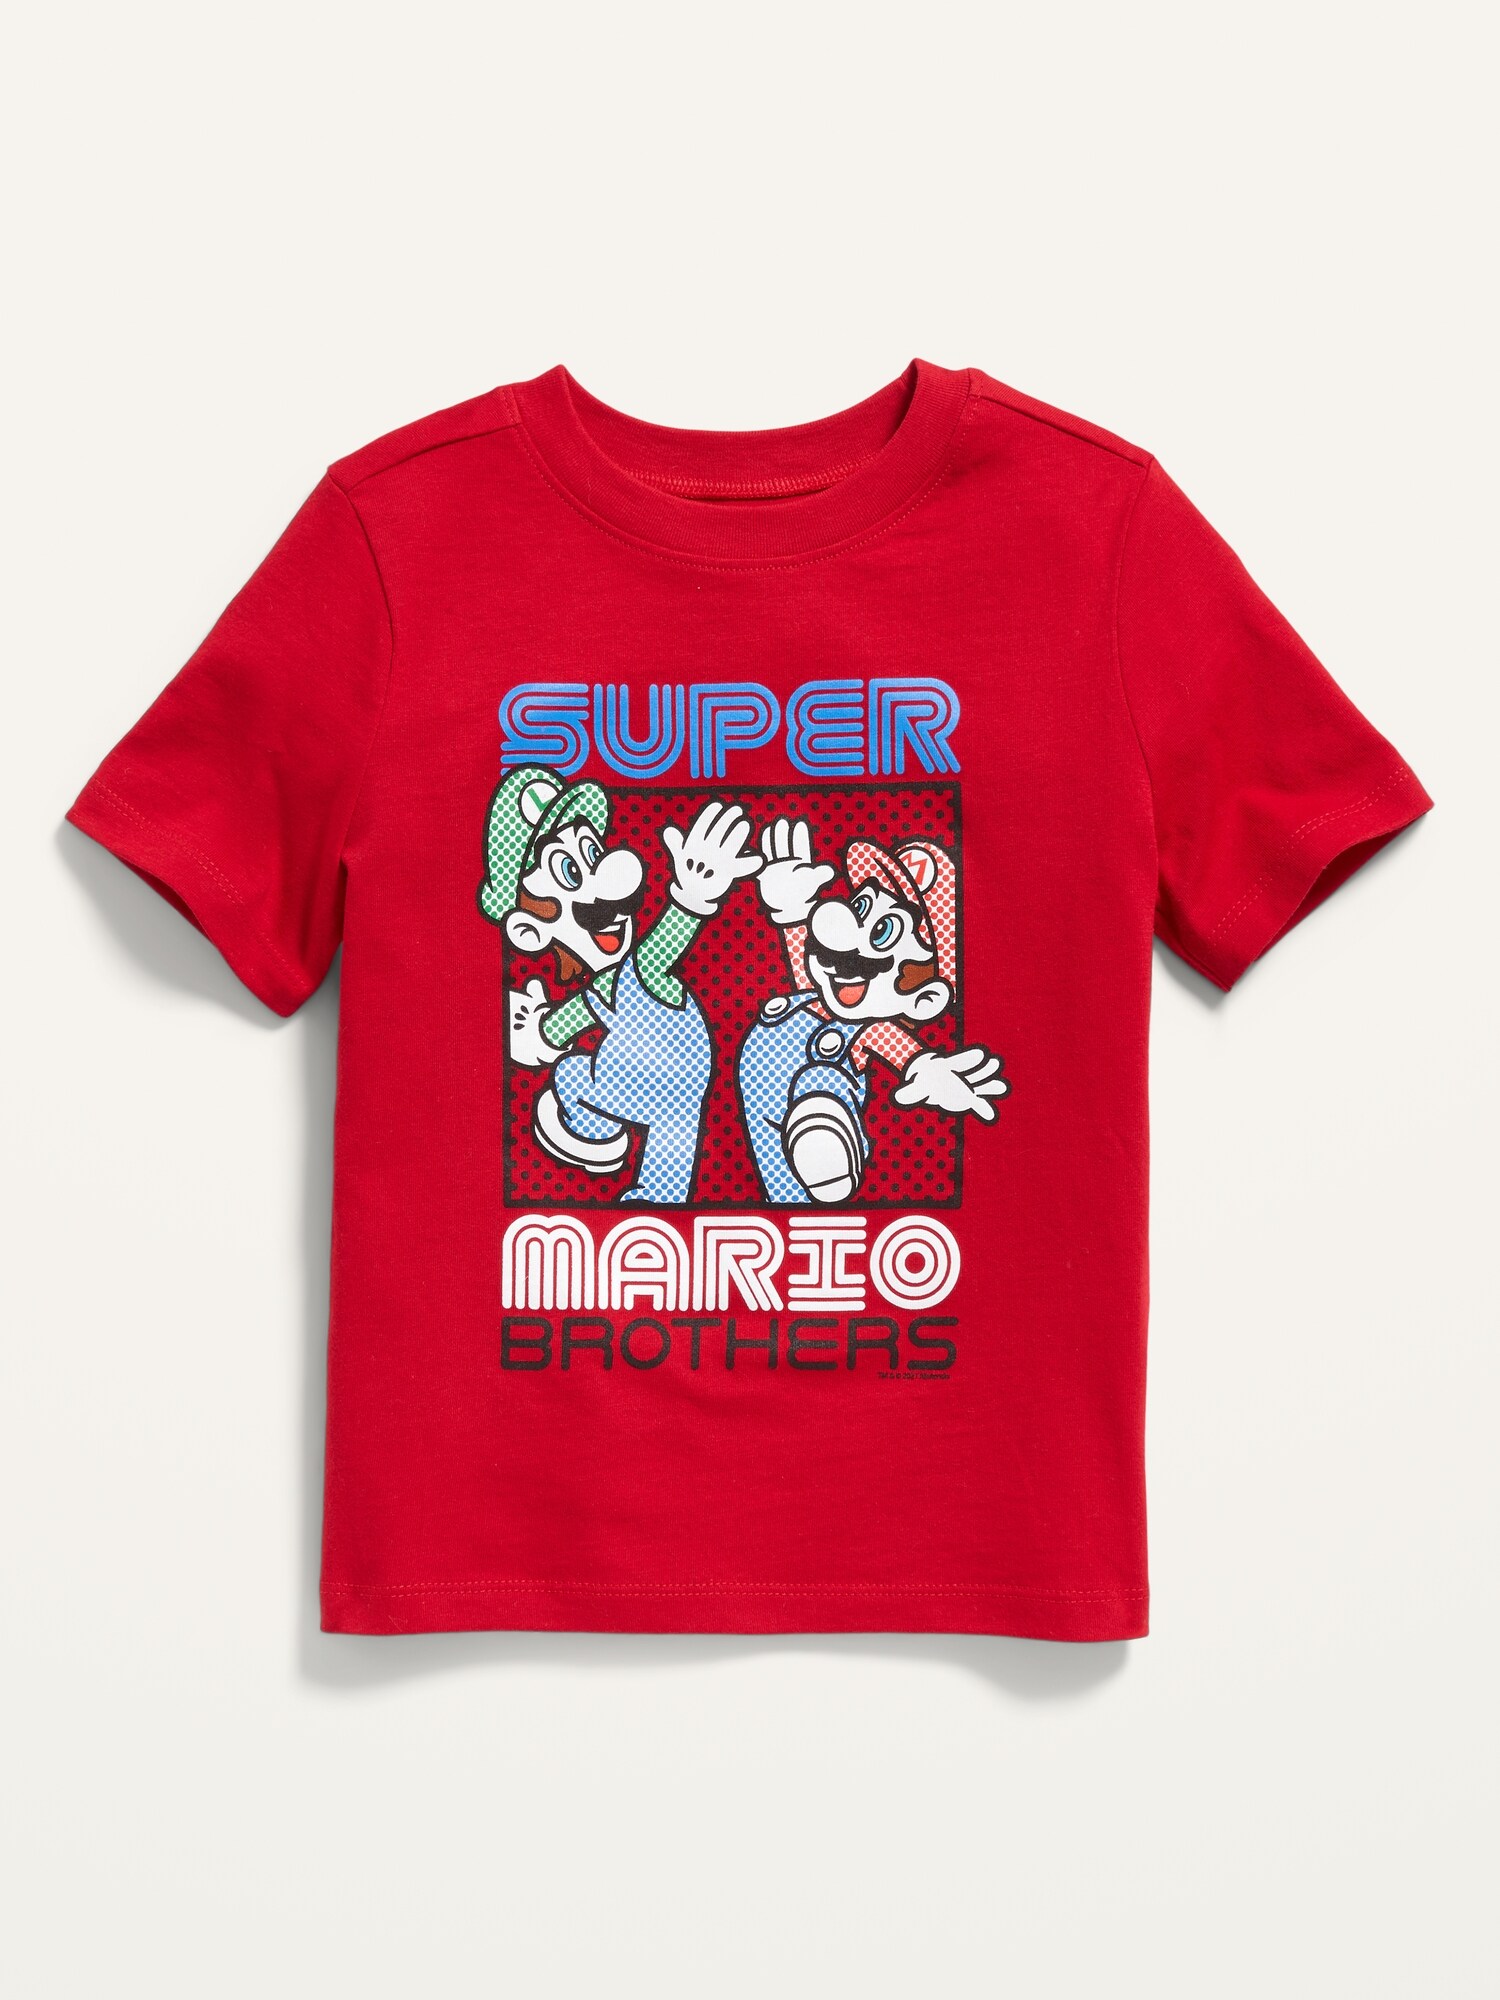 Unisex Super Mario Brothers™ Graphic Tee for Toddler